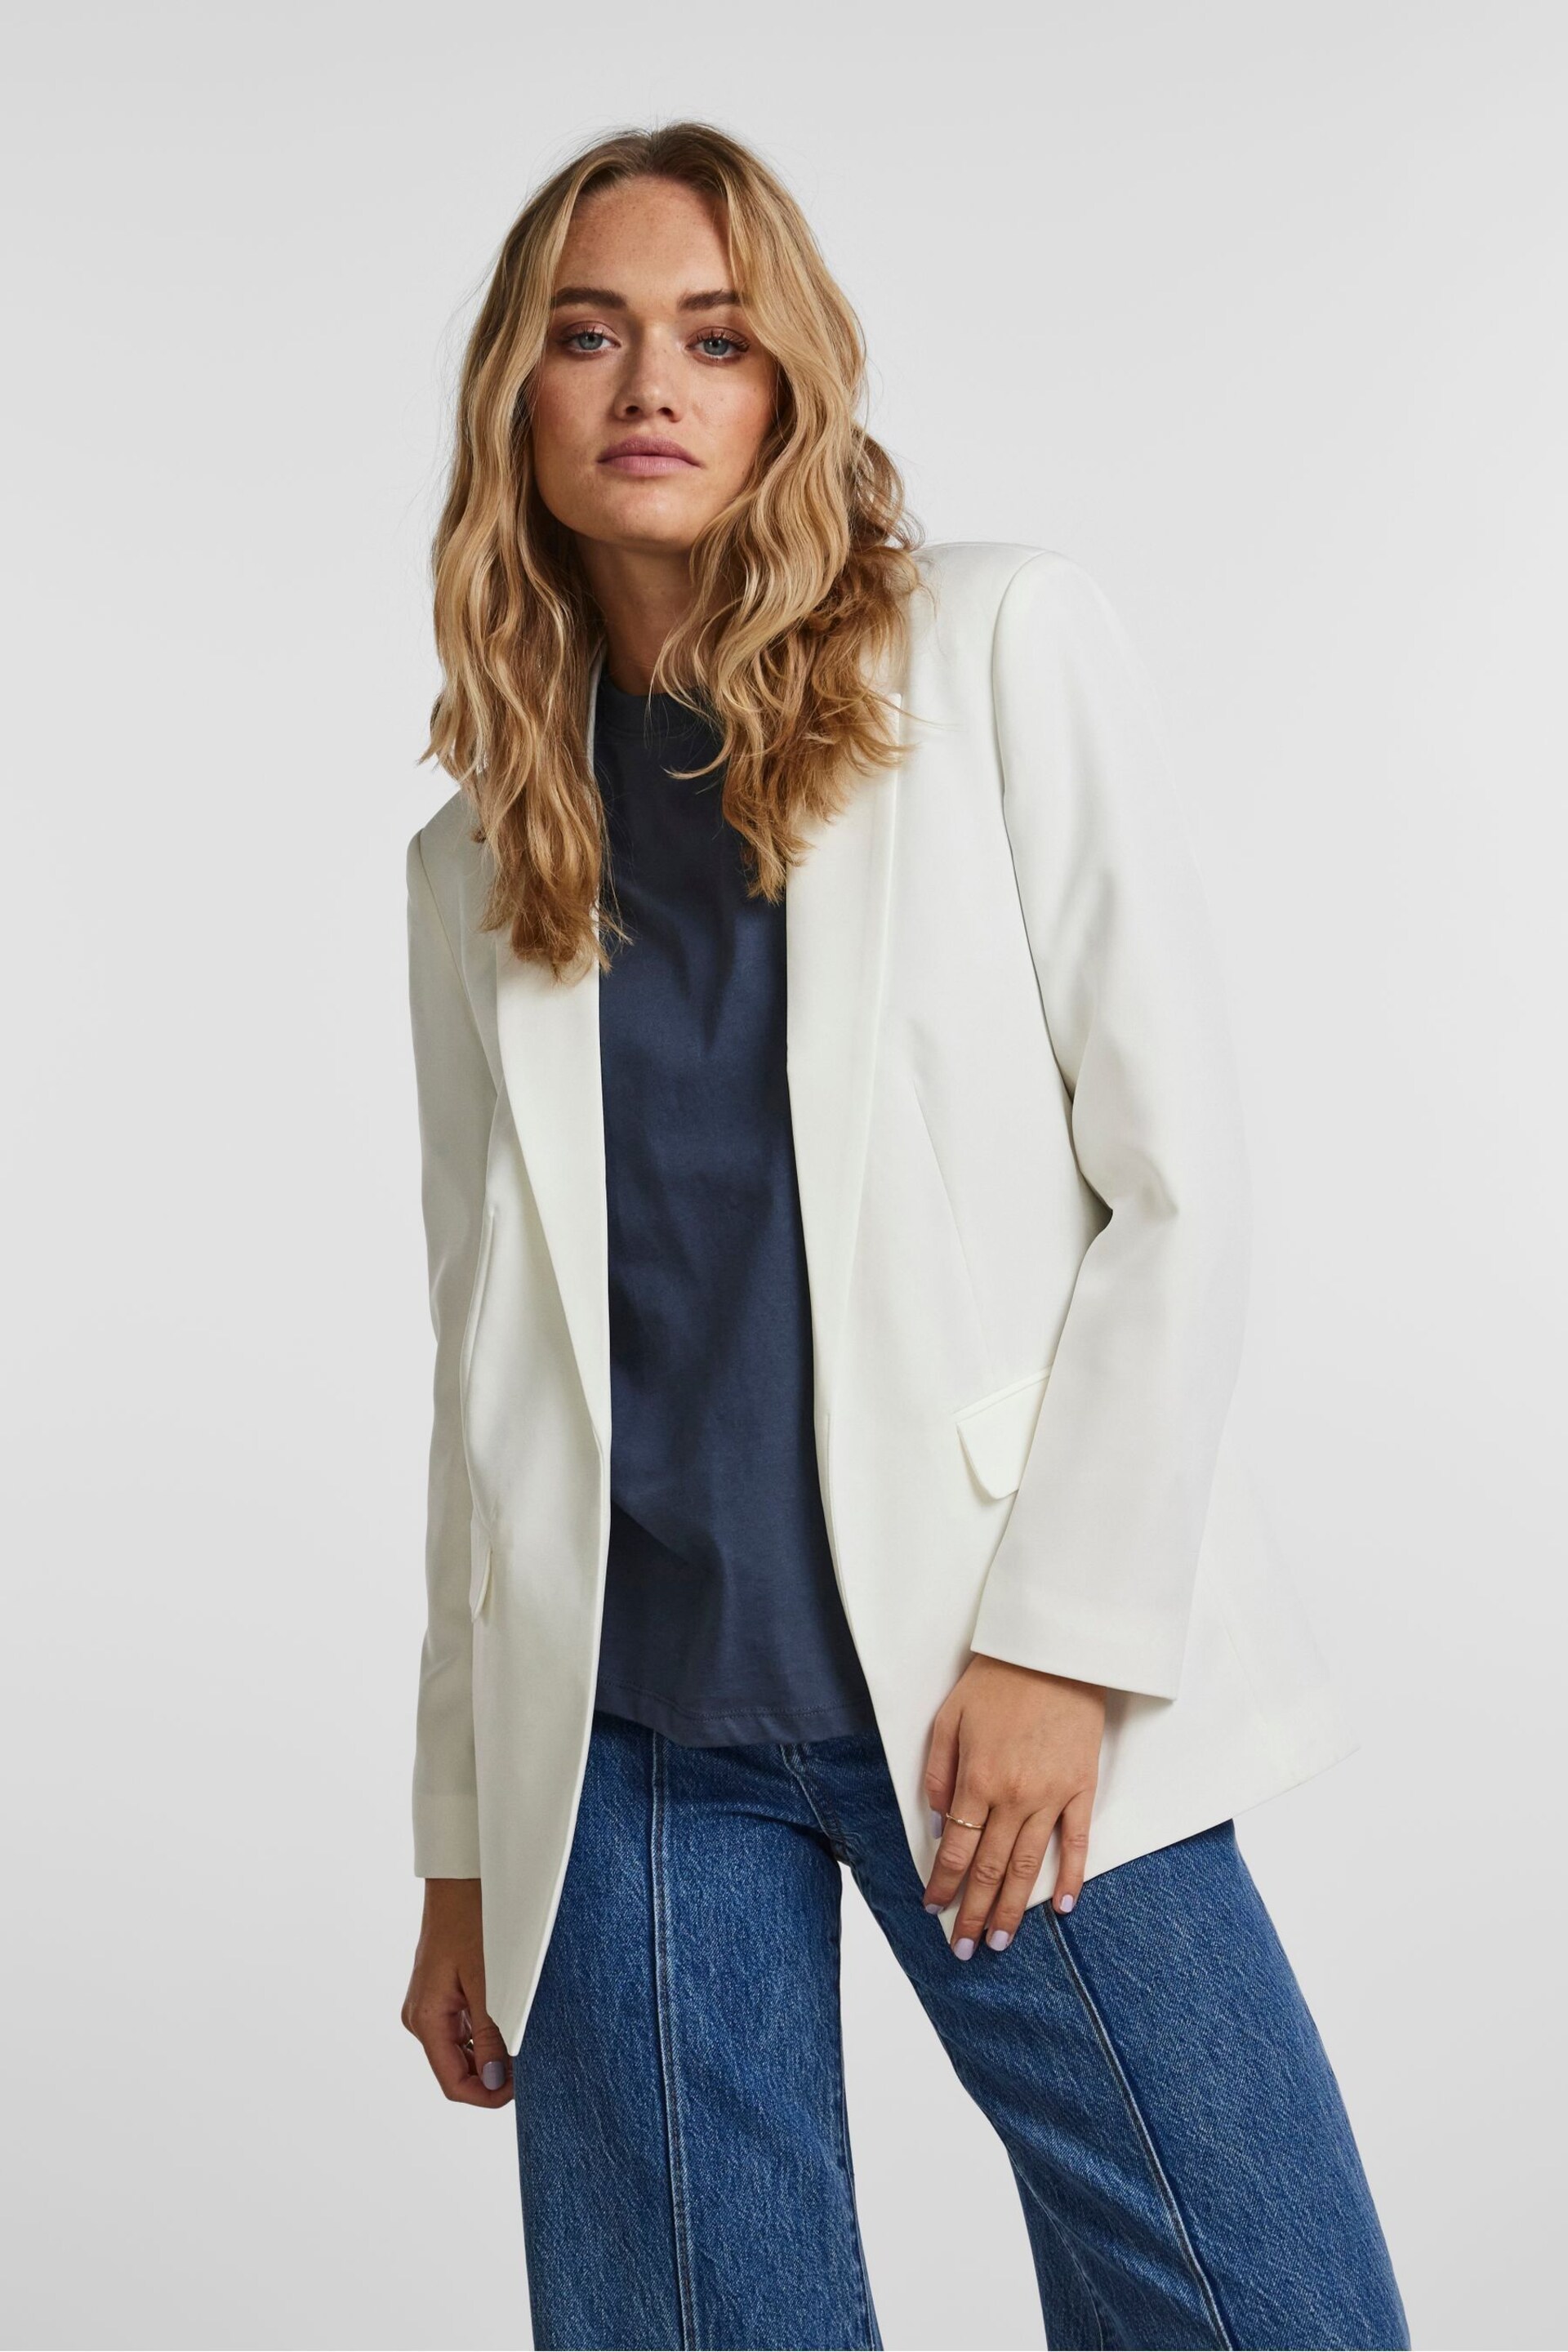 PIECES White Relaxed Fit Blazer - Image 1 of 6